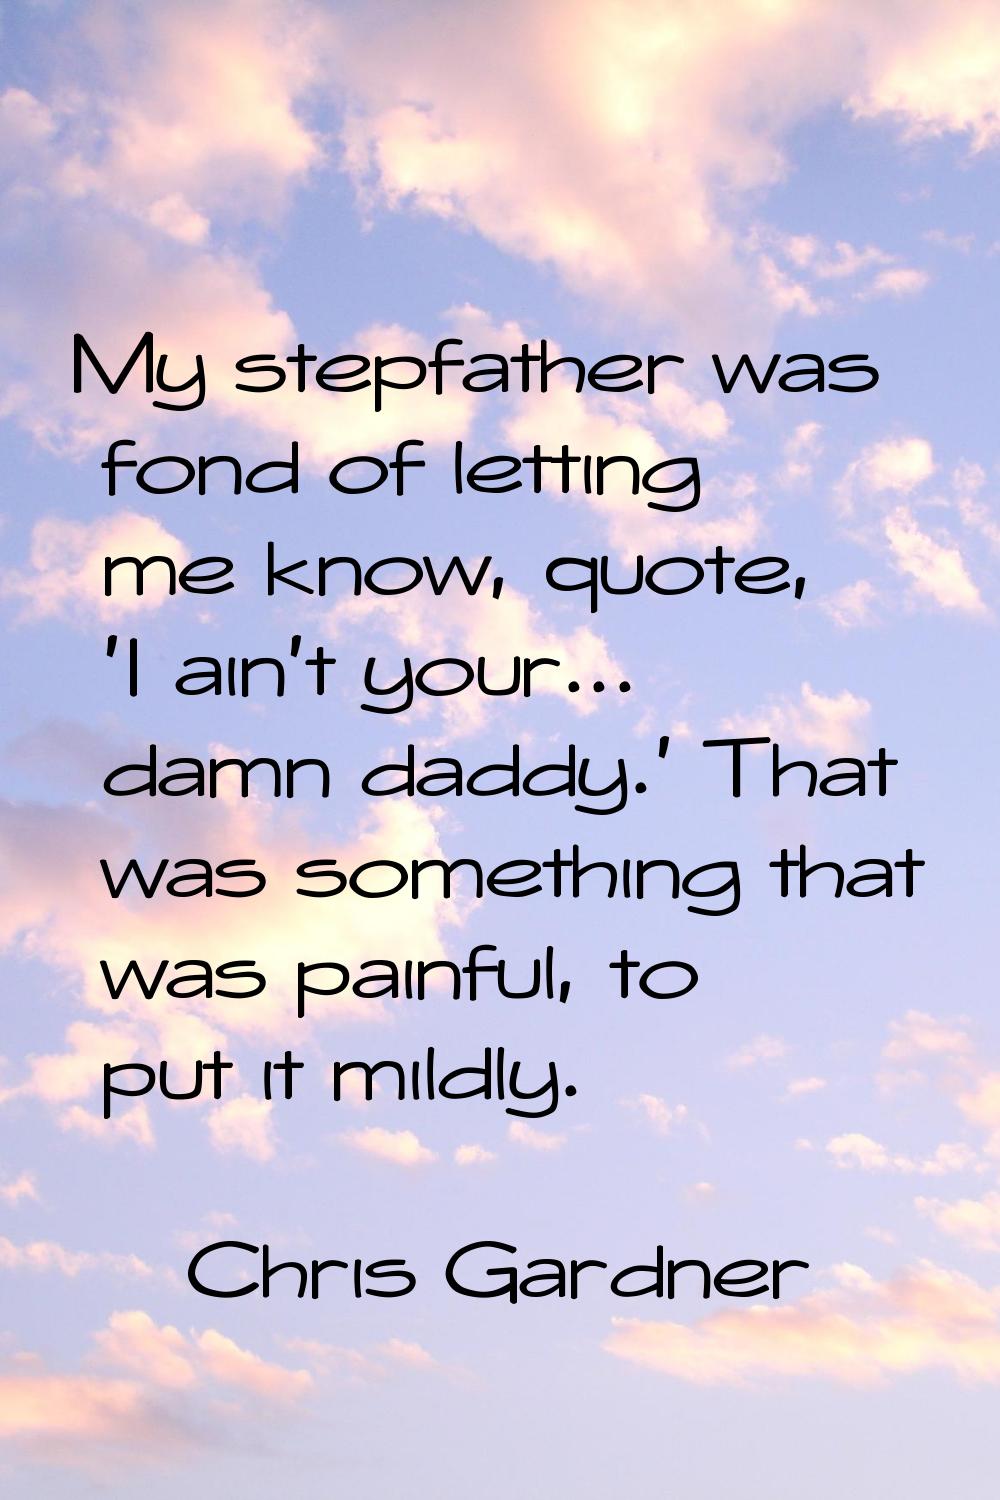 My stepfather was fond of letting me know, quote, 'I ain't your... damn daddy.' That was something 